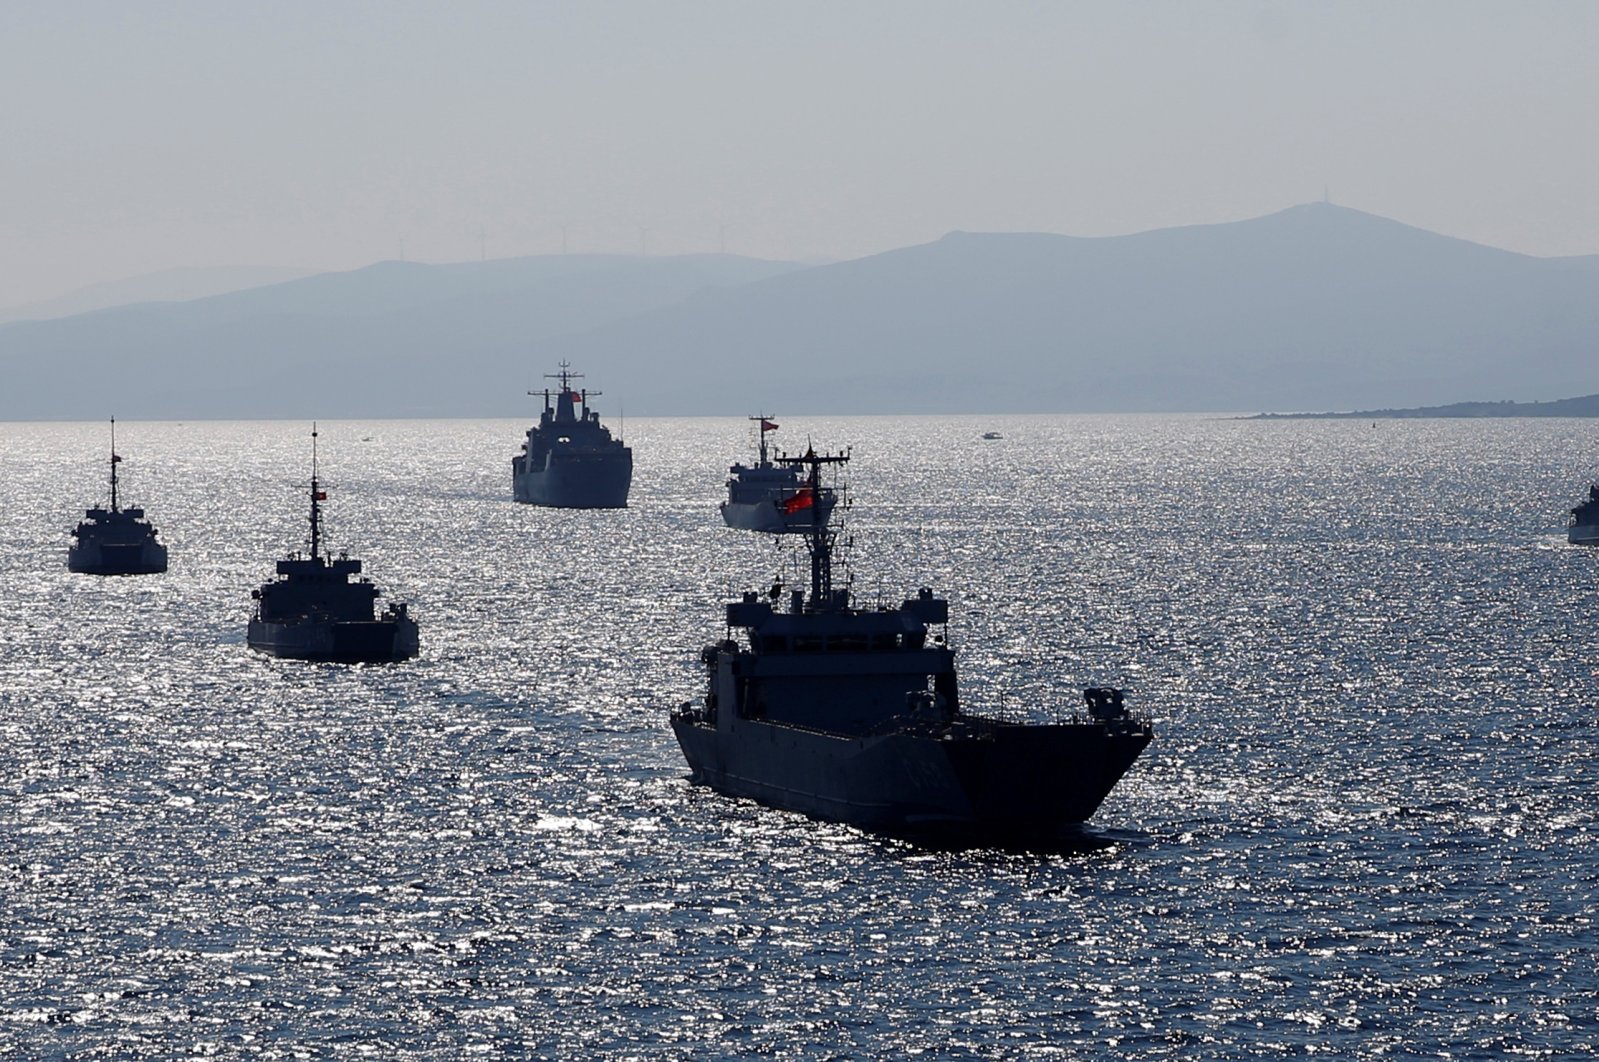 Turkish naval ships take part in a landing drill during the Blue Homeland naval exercise off the Aegean coastal town of Foça in Izmir Bay, western Turkey, March 5, 2019. (Reuters Photo)